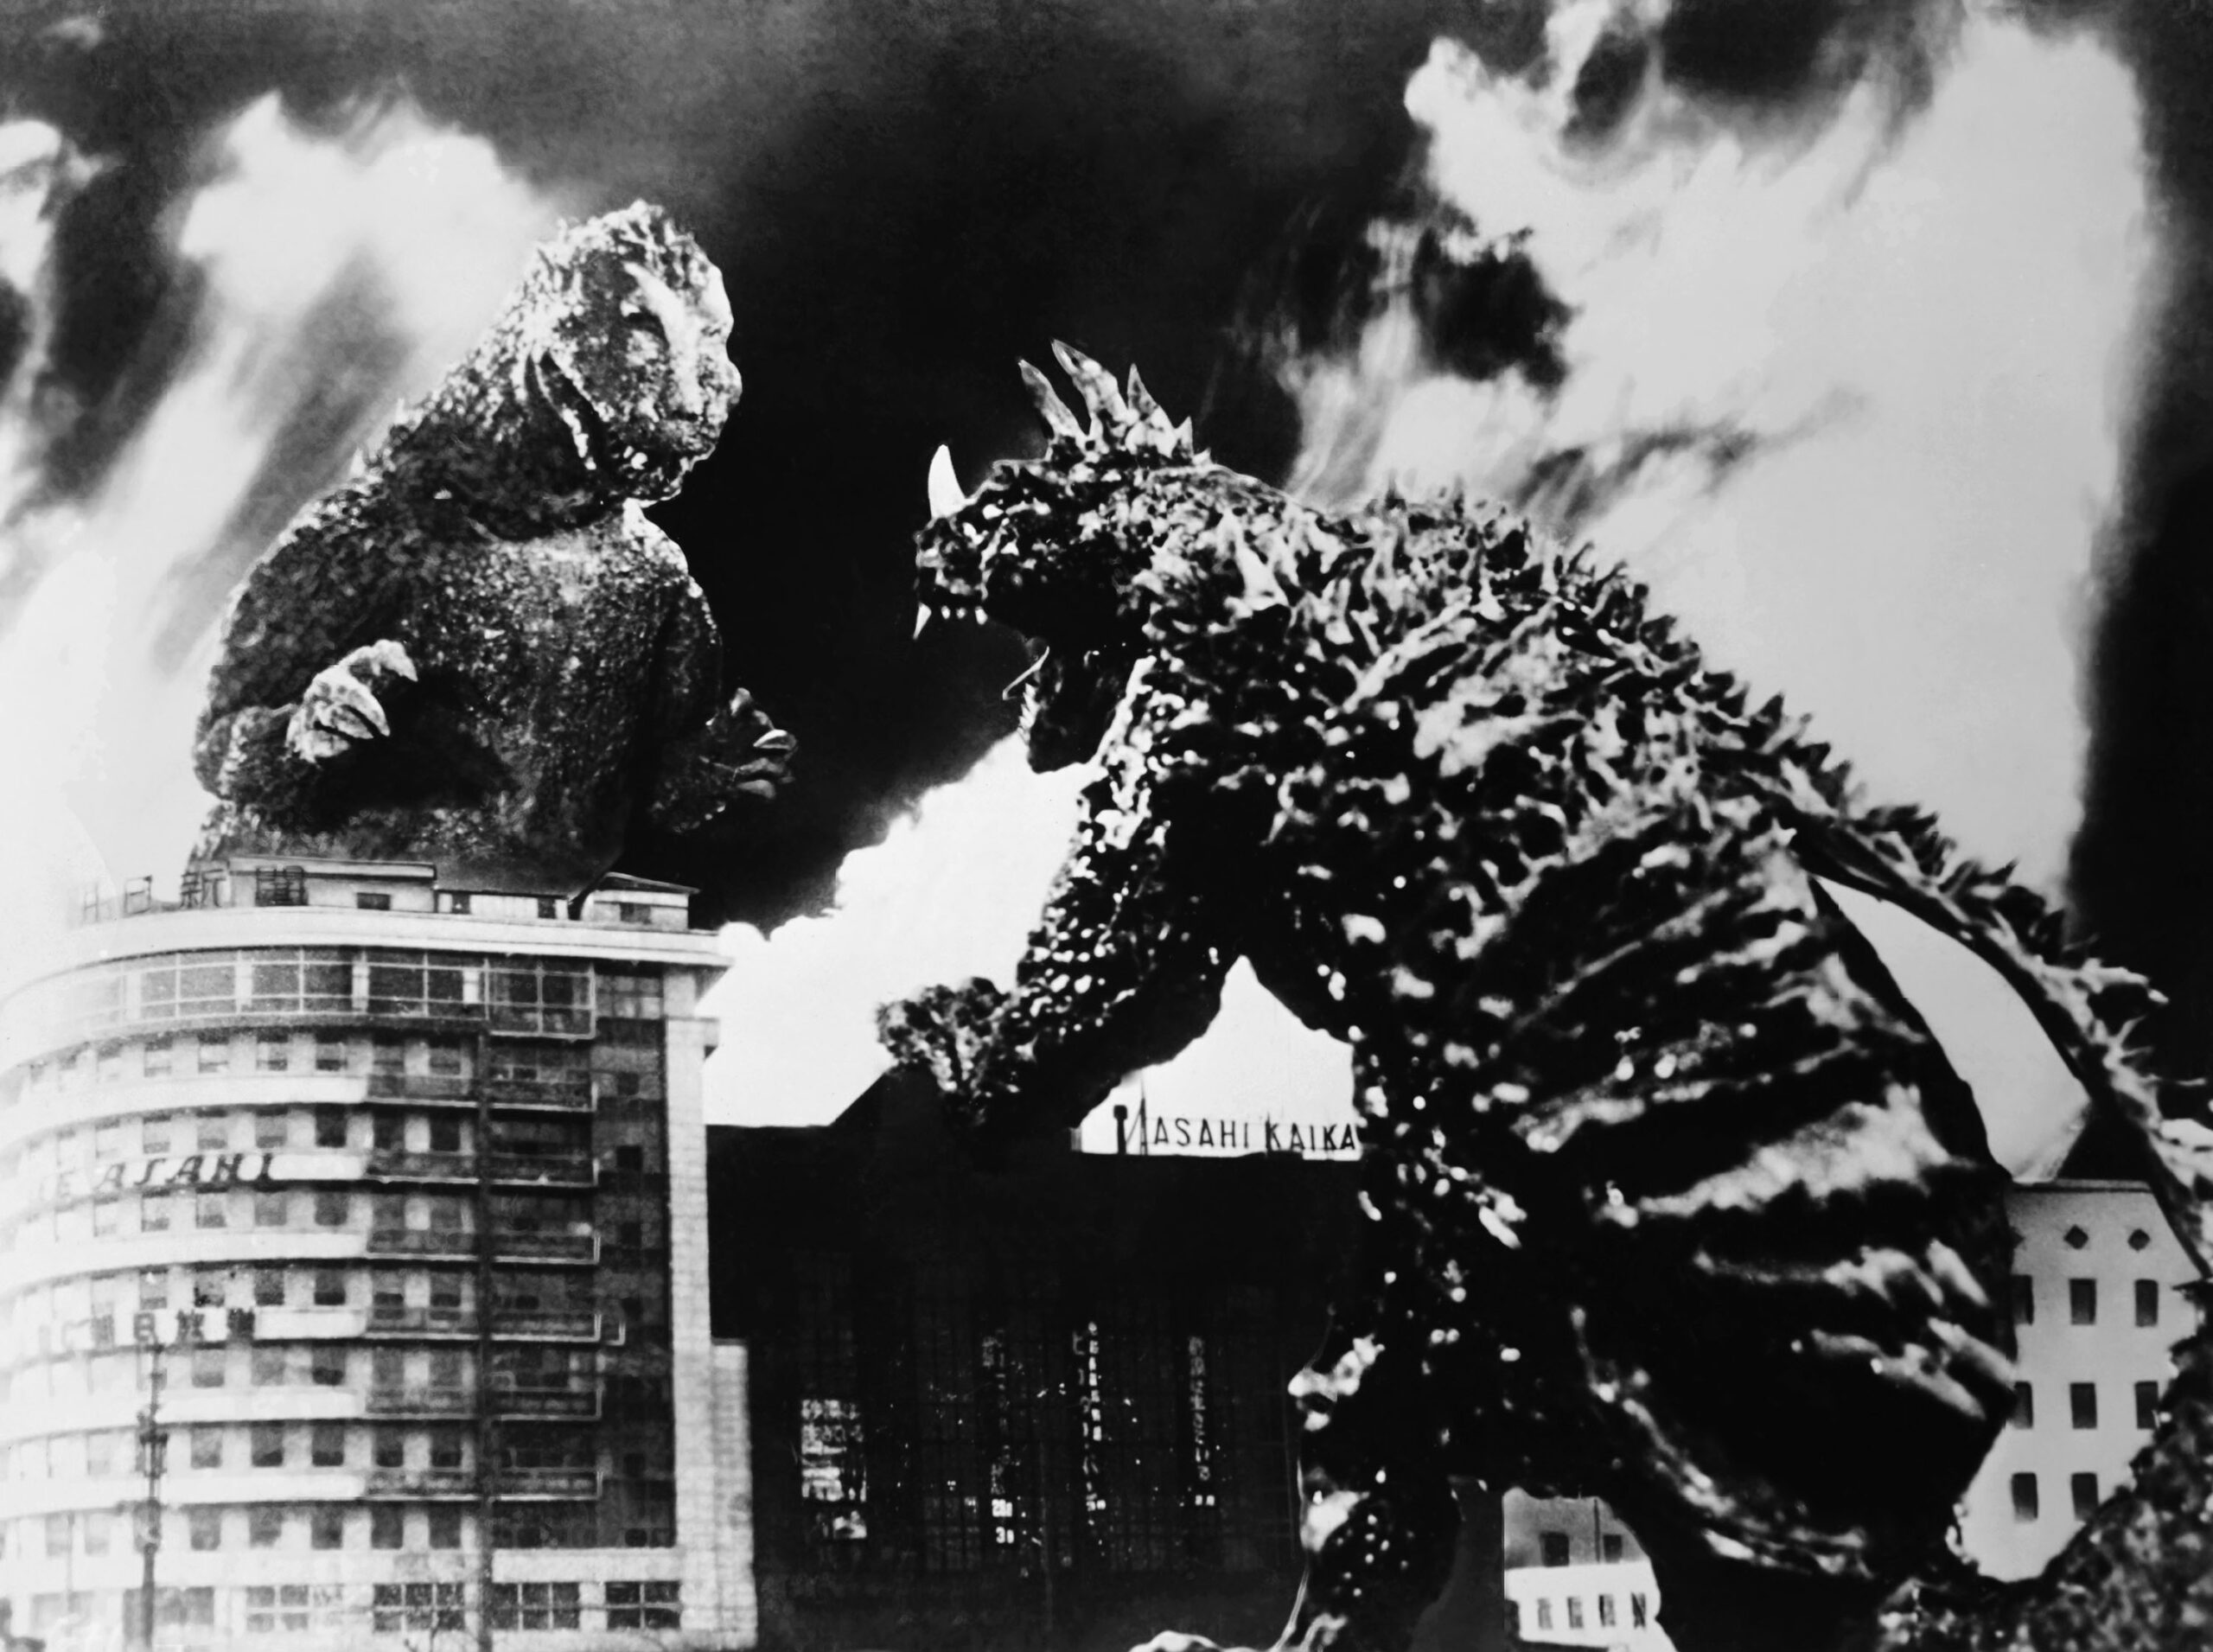 black and white shot from the 1955 Toho film "Godzilla Raids Again." It depicts Godzilla fighting with the four-legged, armored kaiju Anguirus. They are battling in a city that is engulfed in flames.